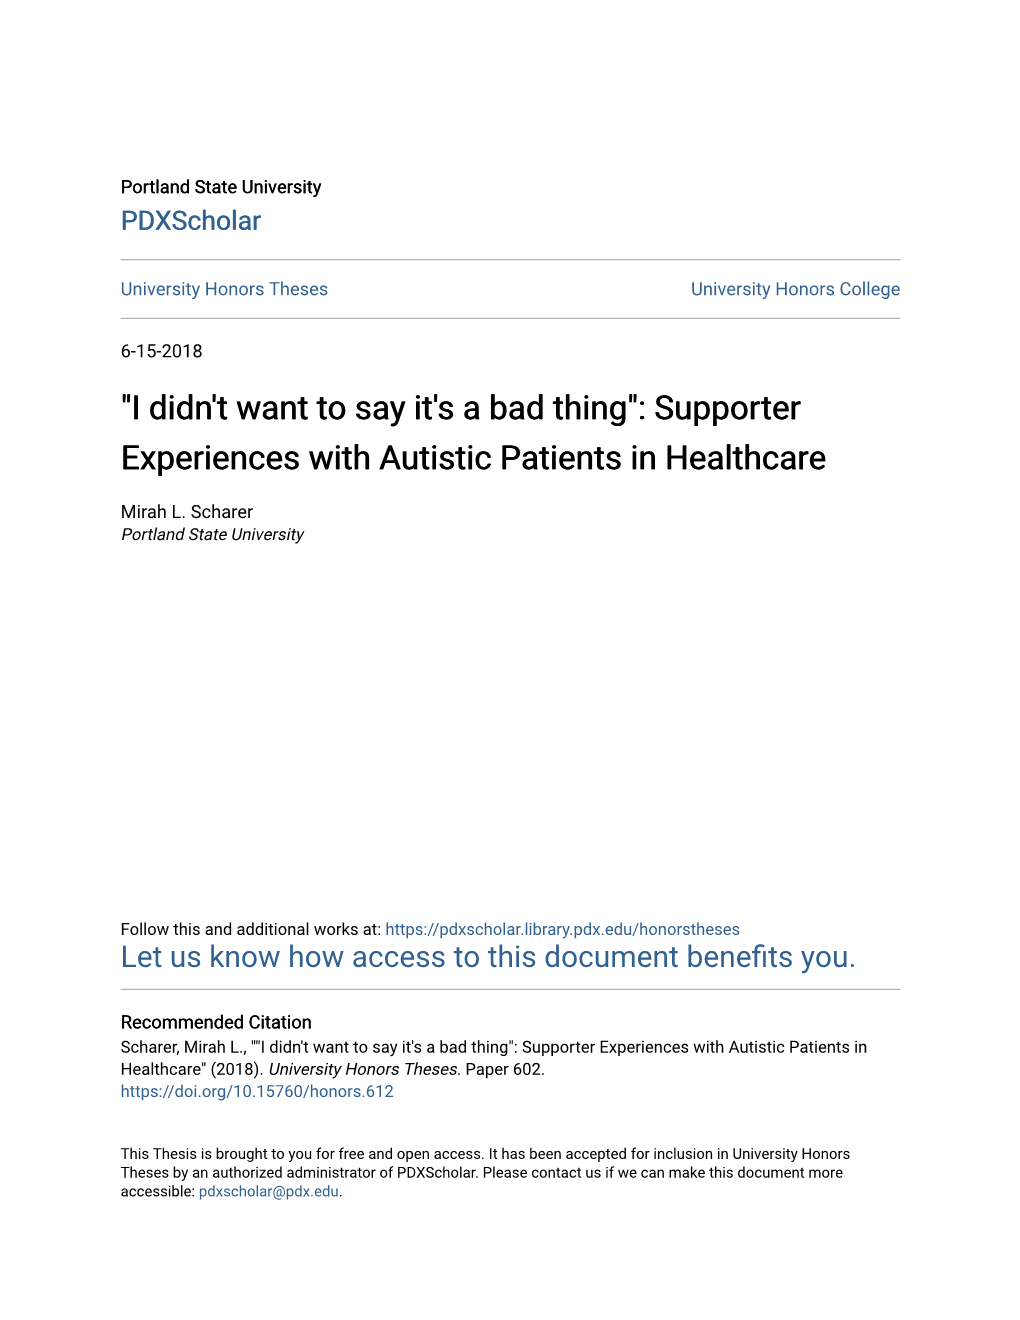 Supporter Experiences with Autistic Patients in Healthcare